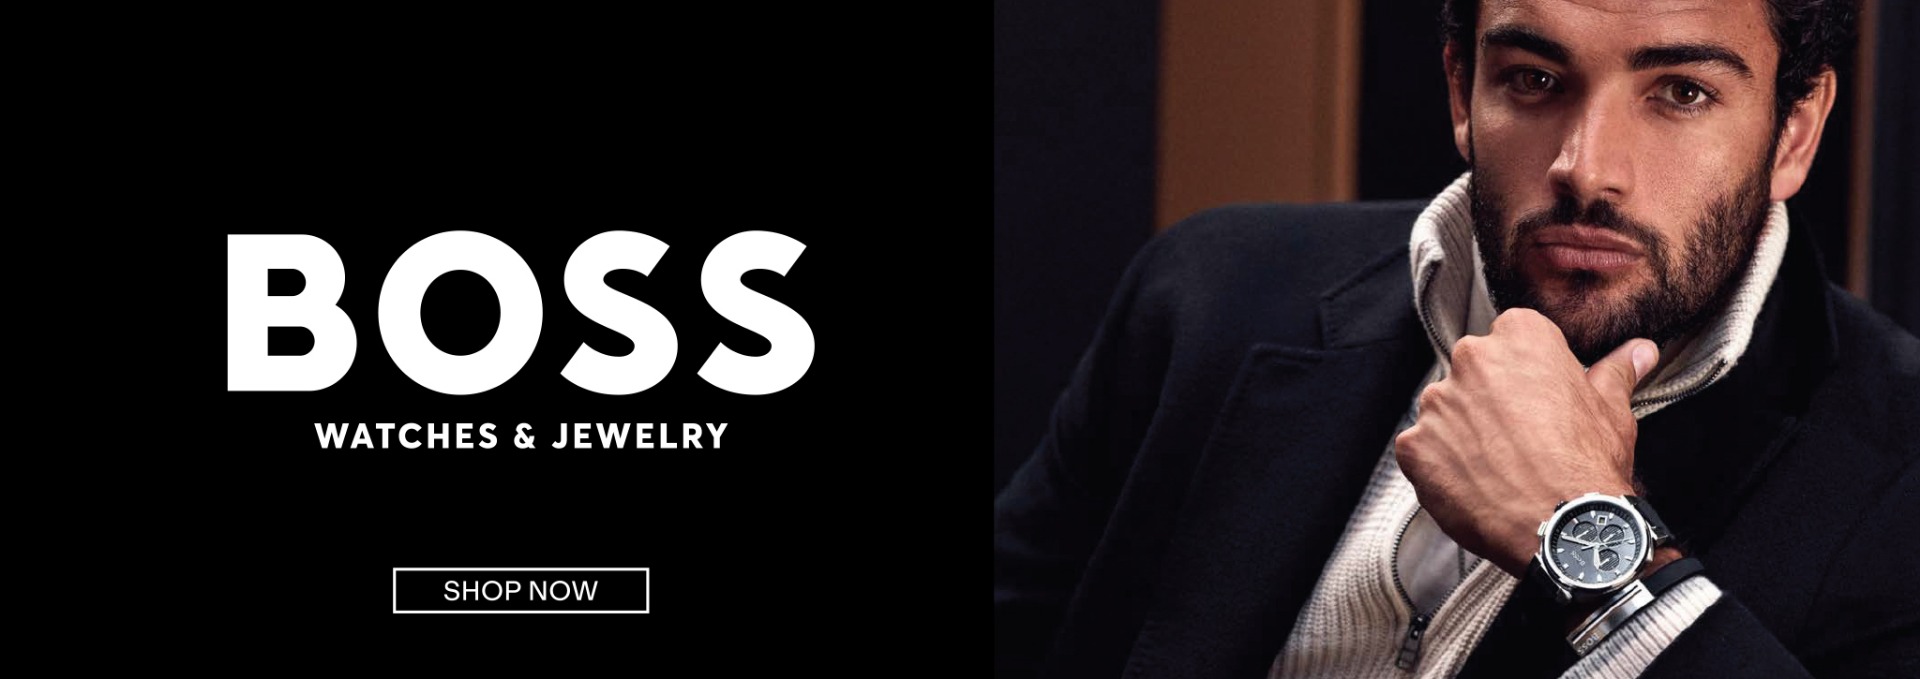 Boss - watches & jewlry. shop now.